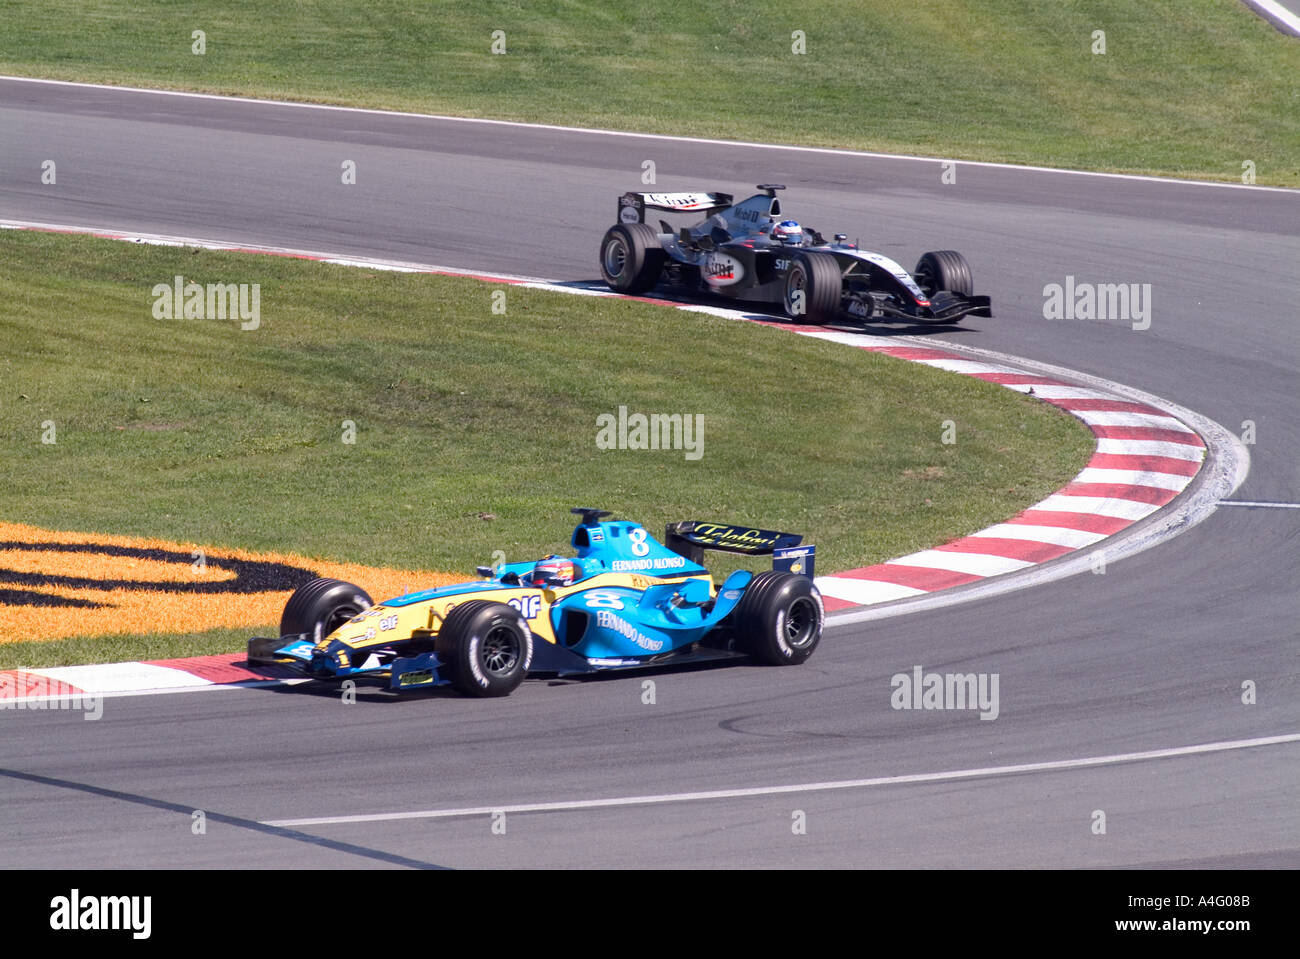 Two Formula 1 Racing Cars Blue Yellow Bodies In Race Corner Gilles Stock Photo Alamy